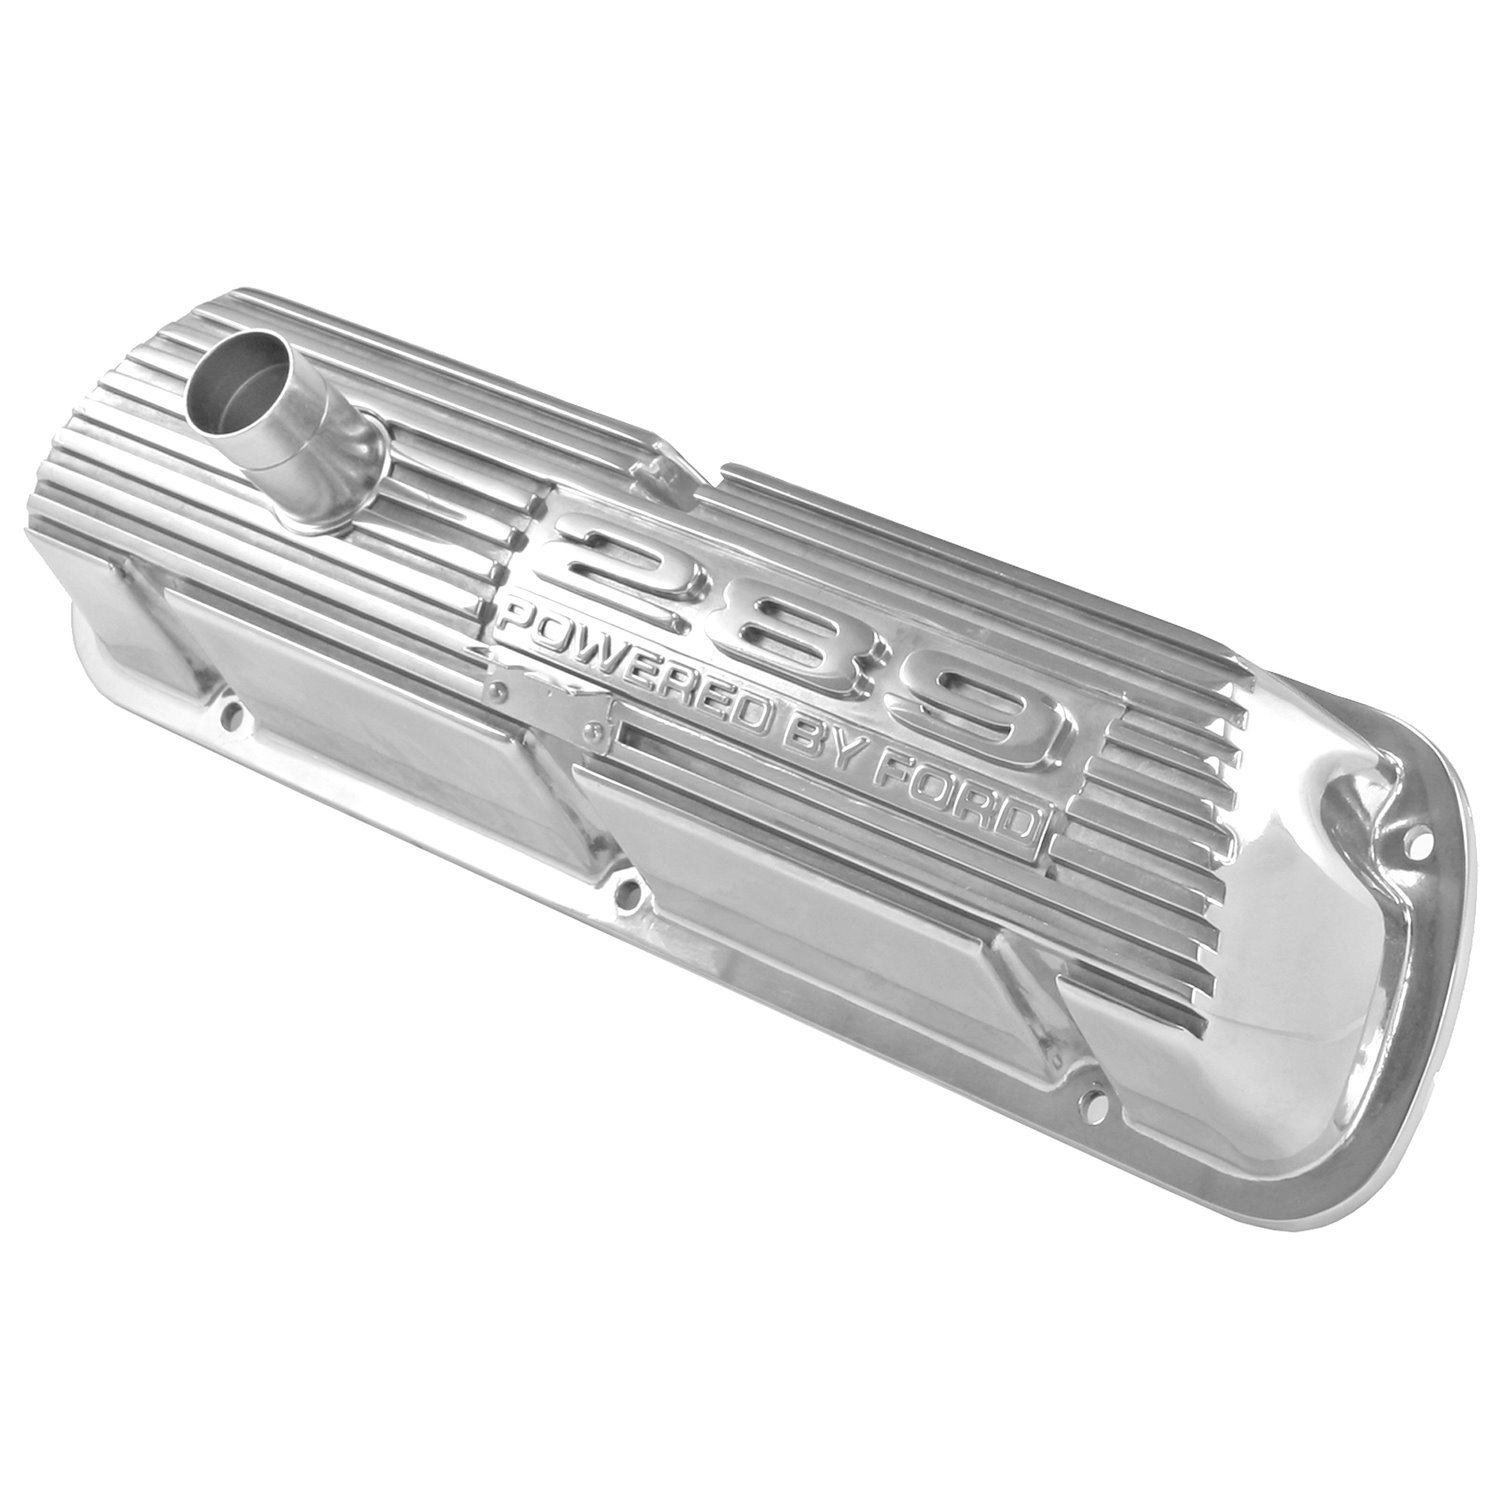 Custom Valve Covers for Ford 289 Engines